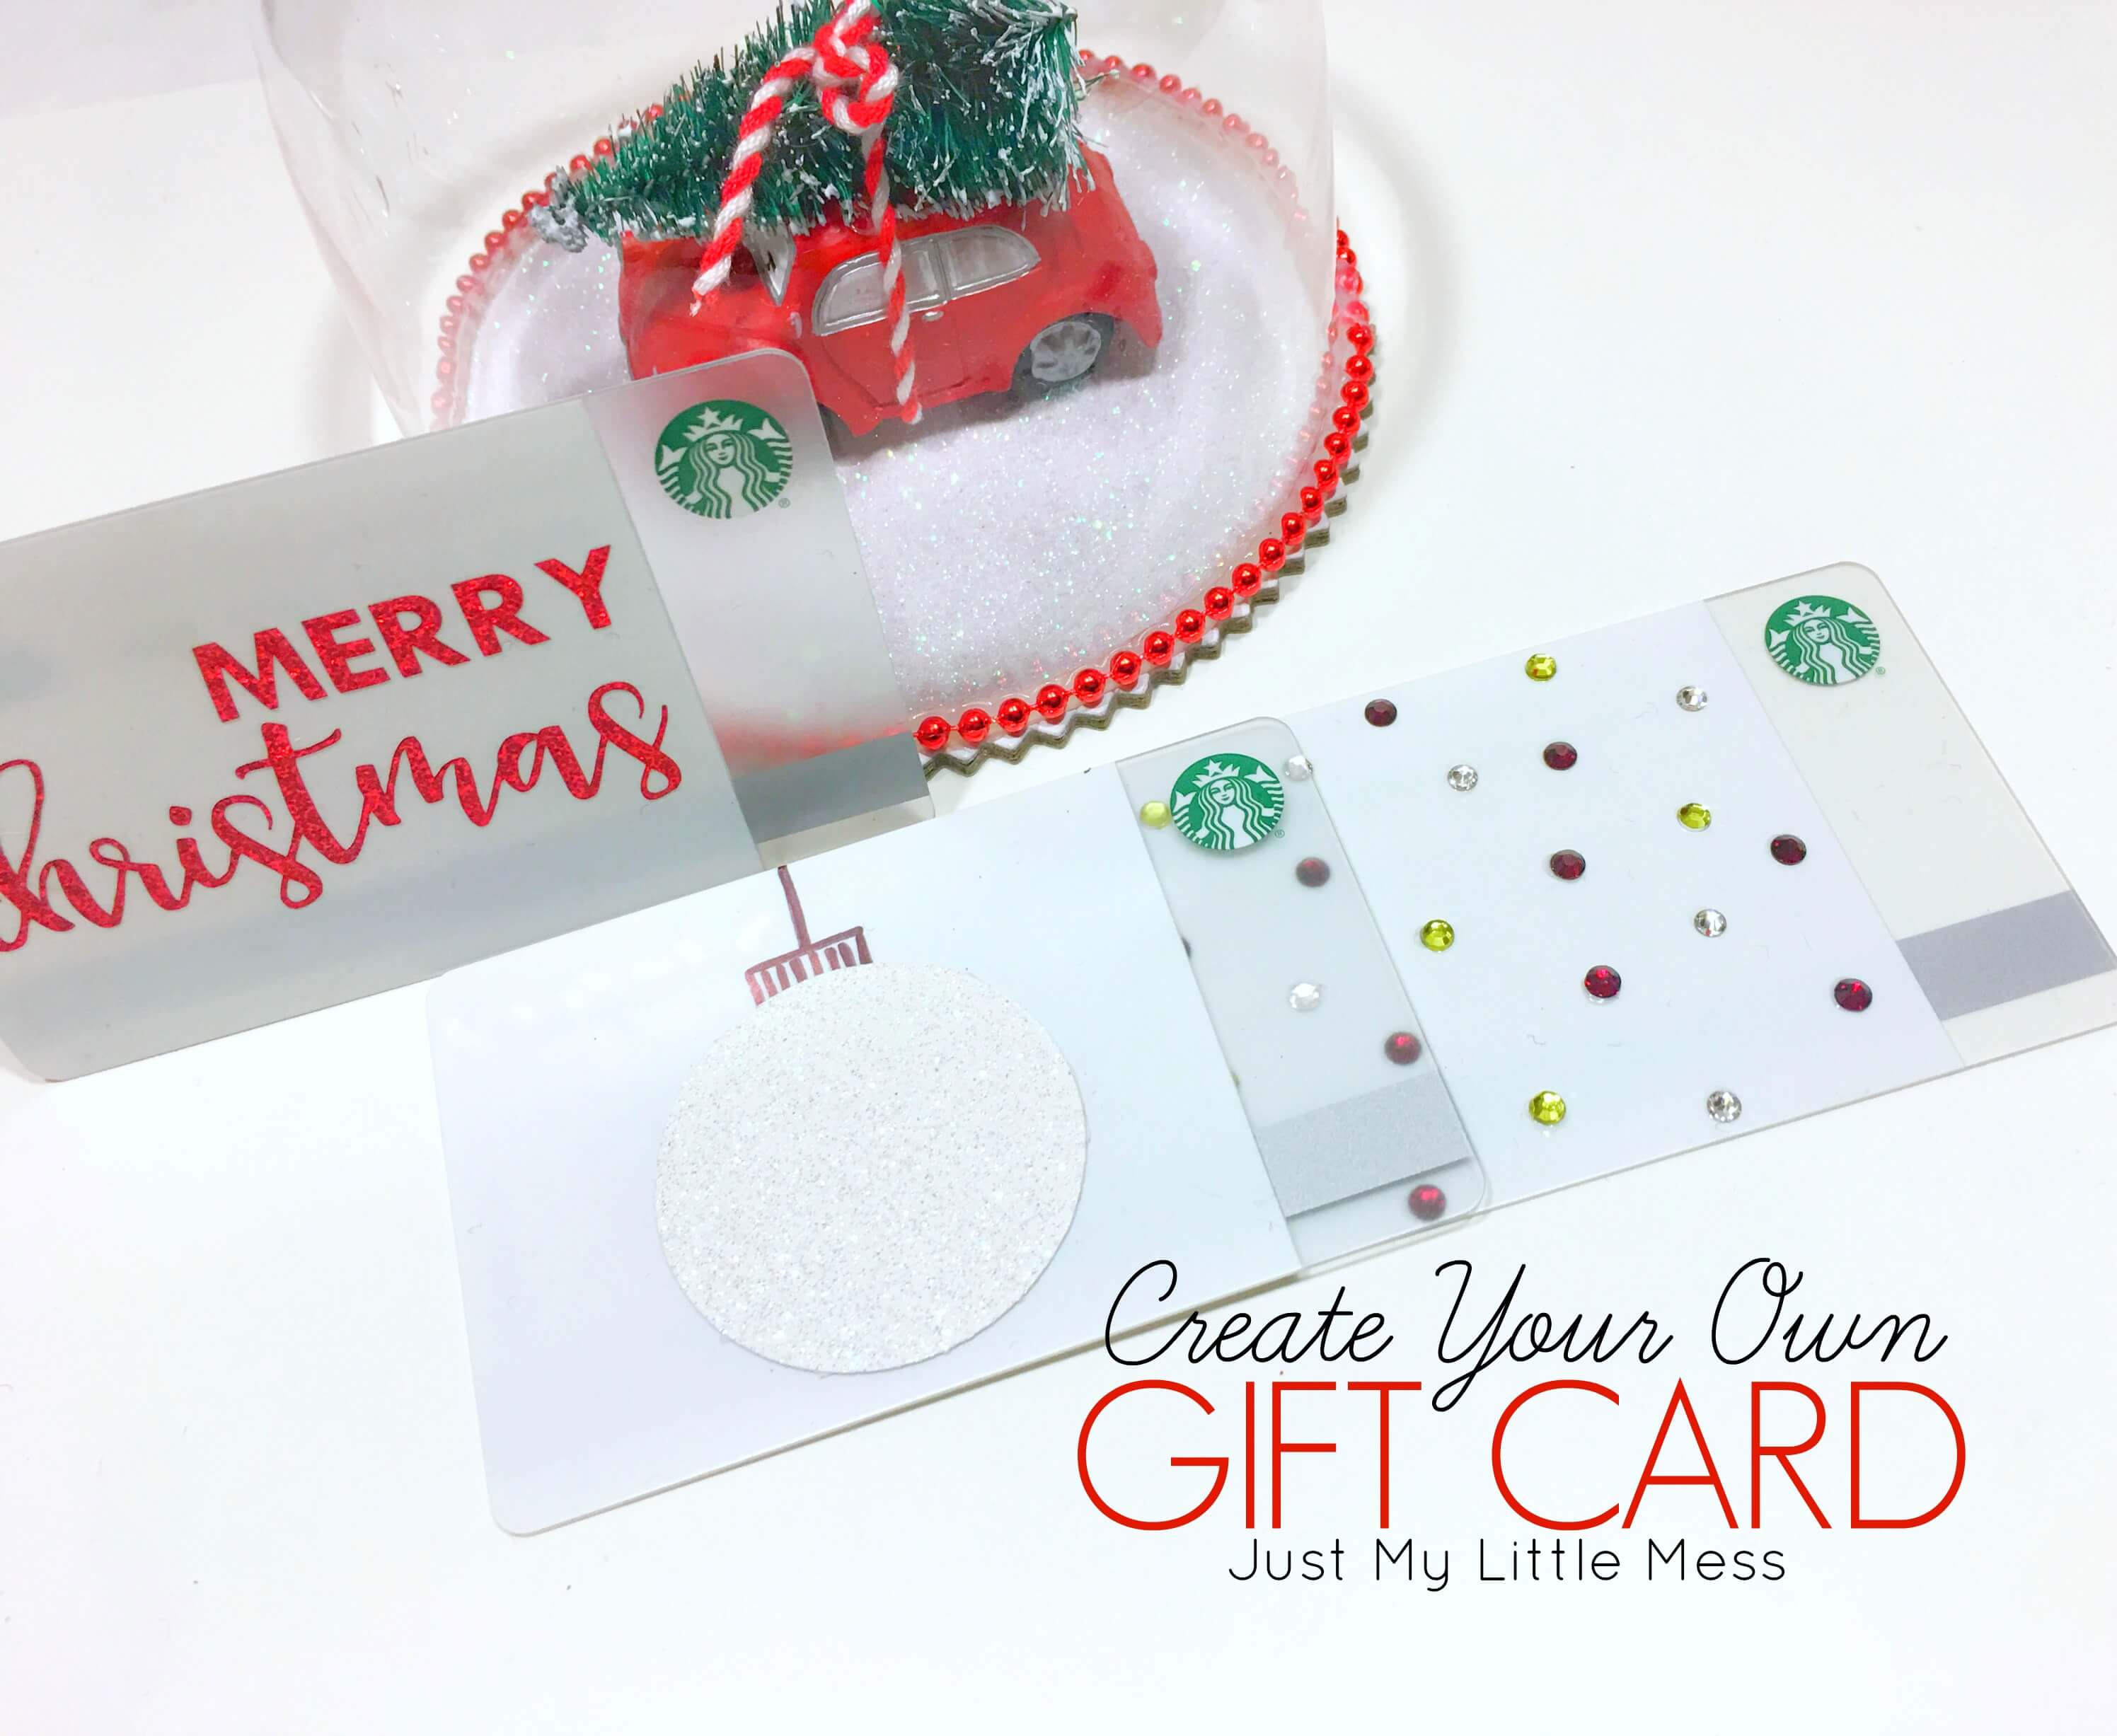 Create your own personalized Starbucks gift card